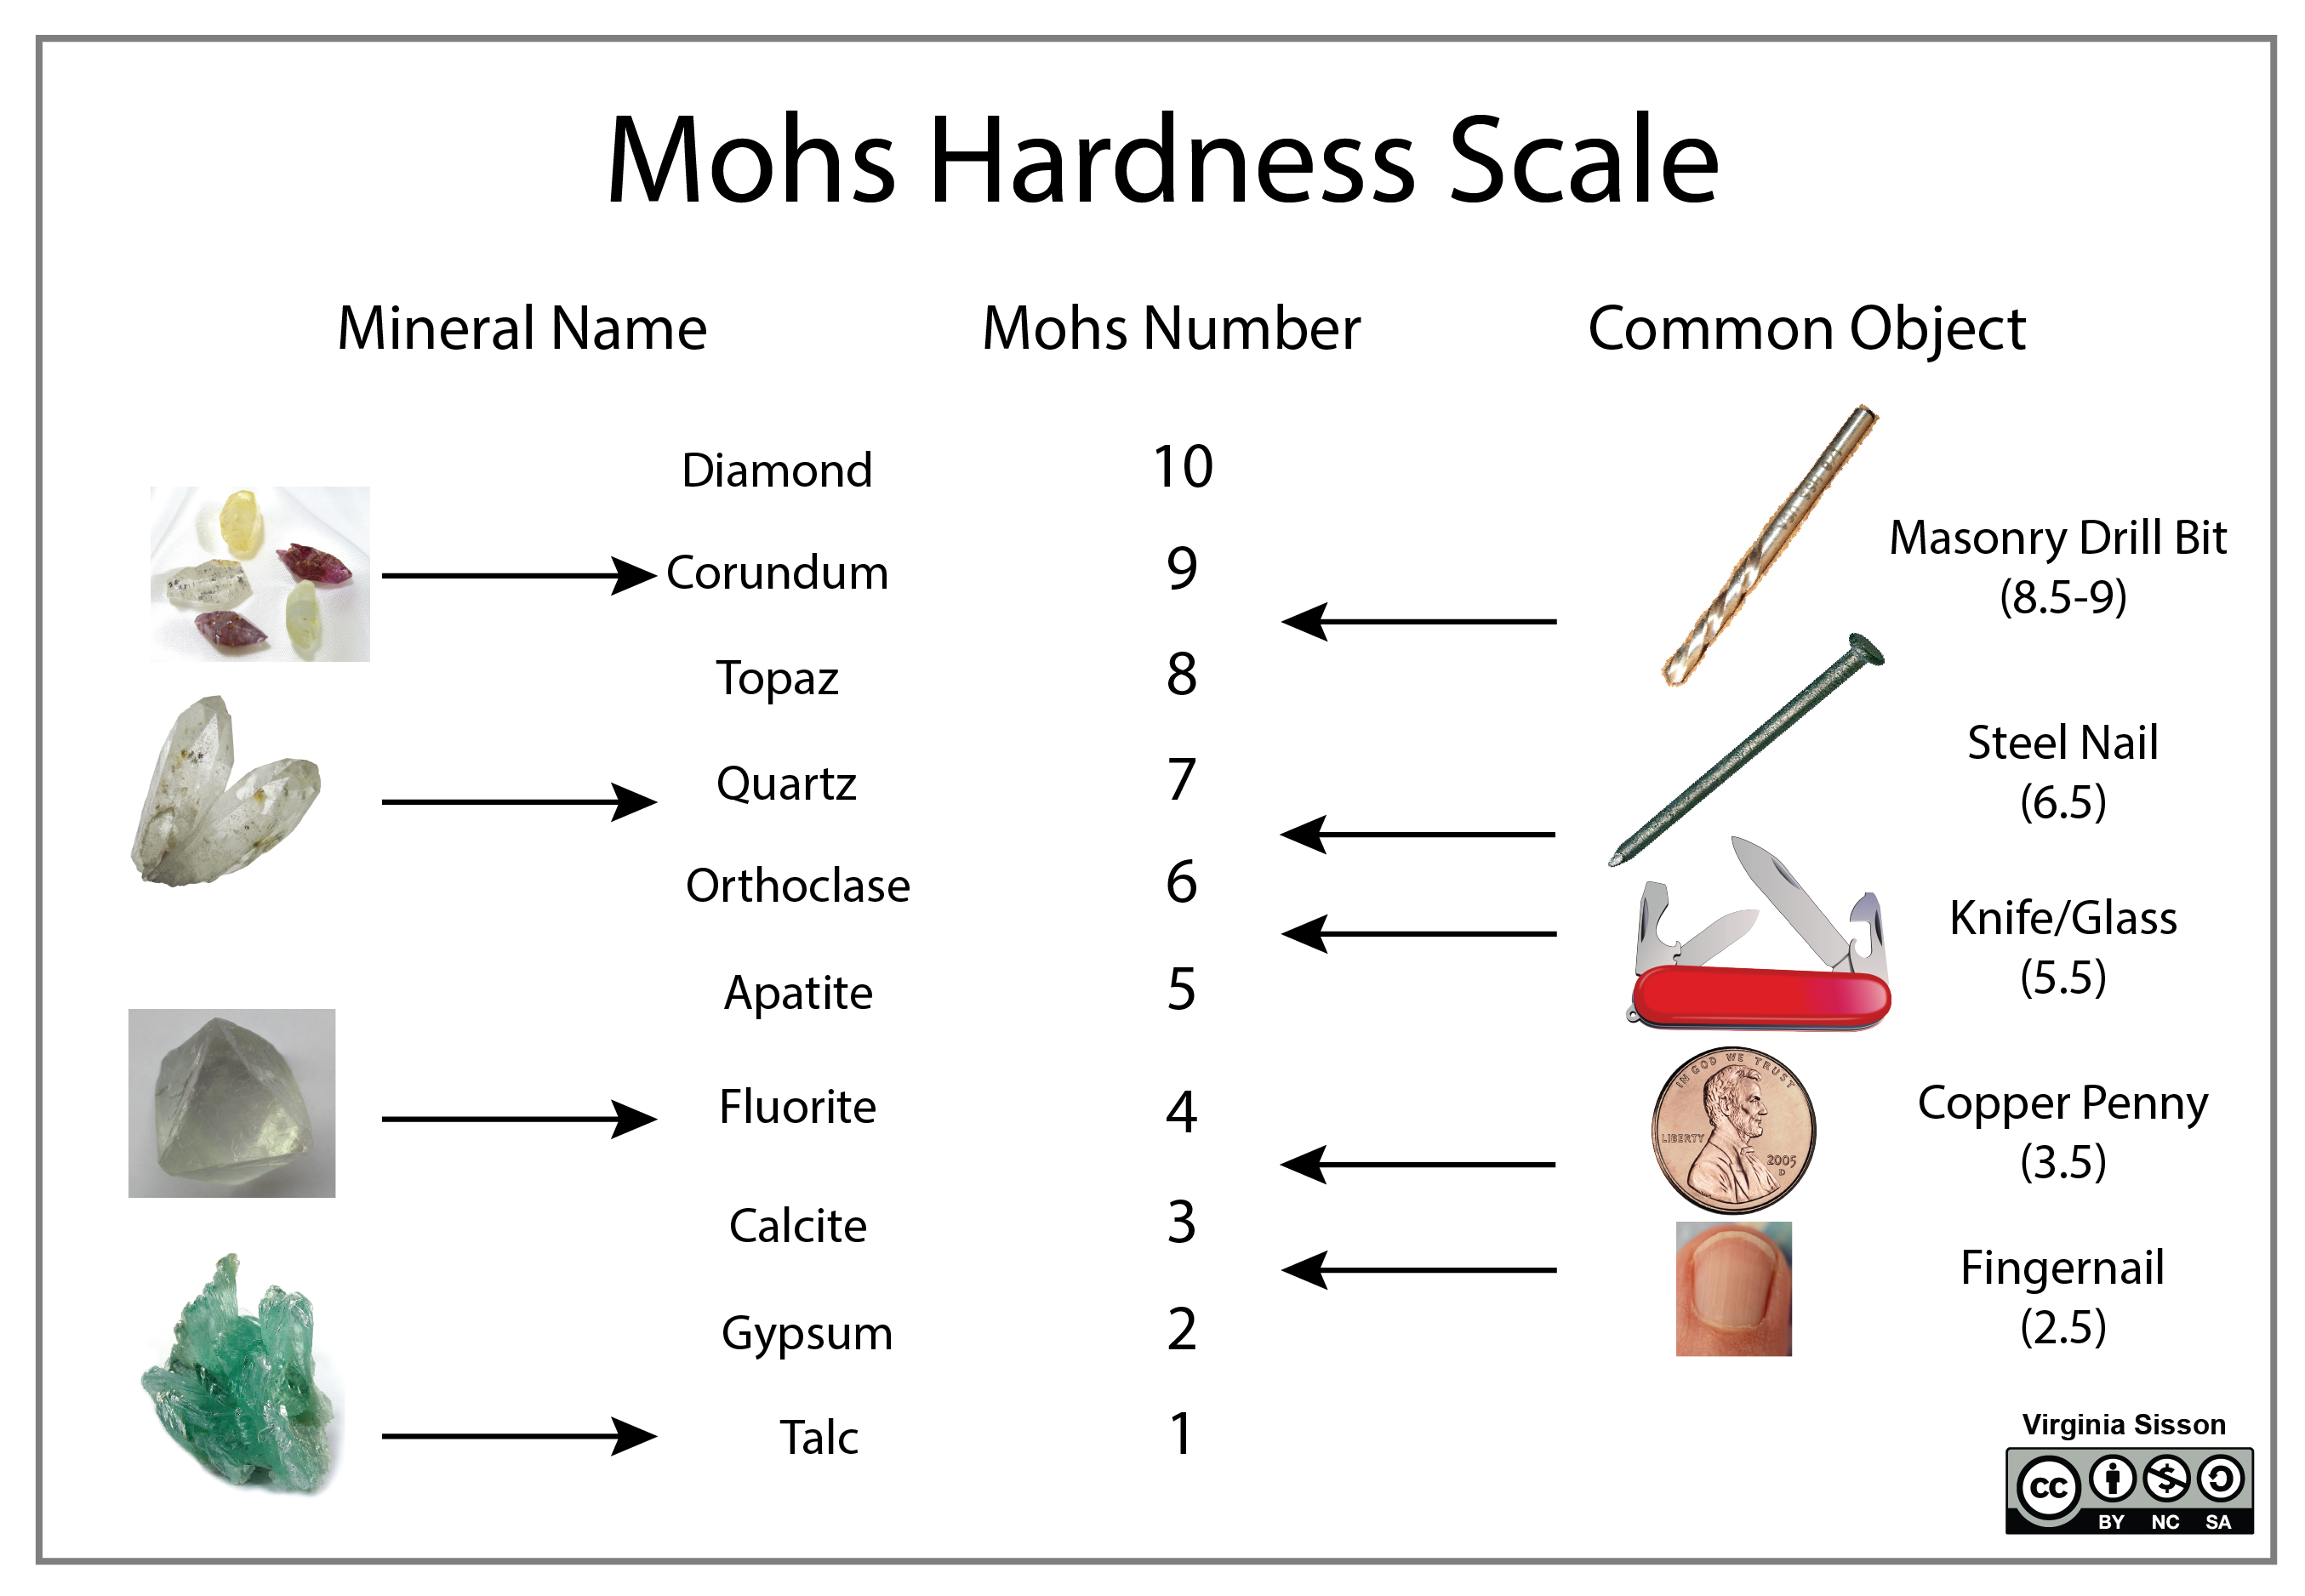 Mohs scale of relative hardness of minerals compared to common objects (finger nail, copper penny, glass, steel nail, and masonry bit).